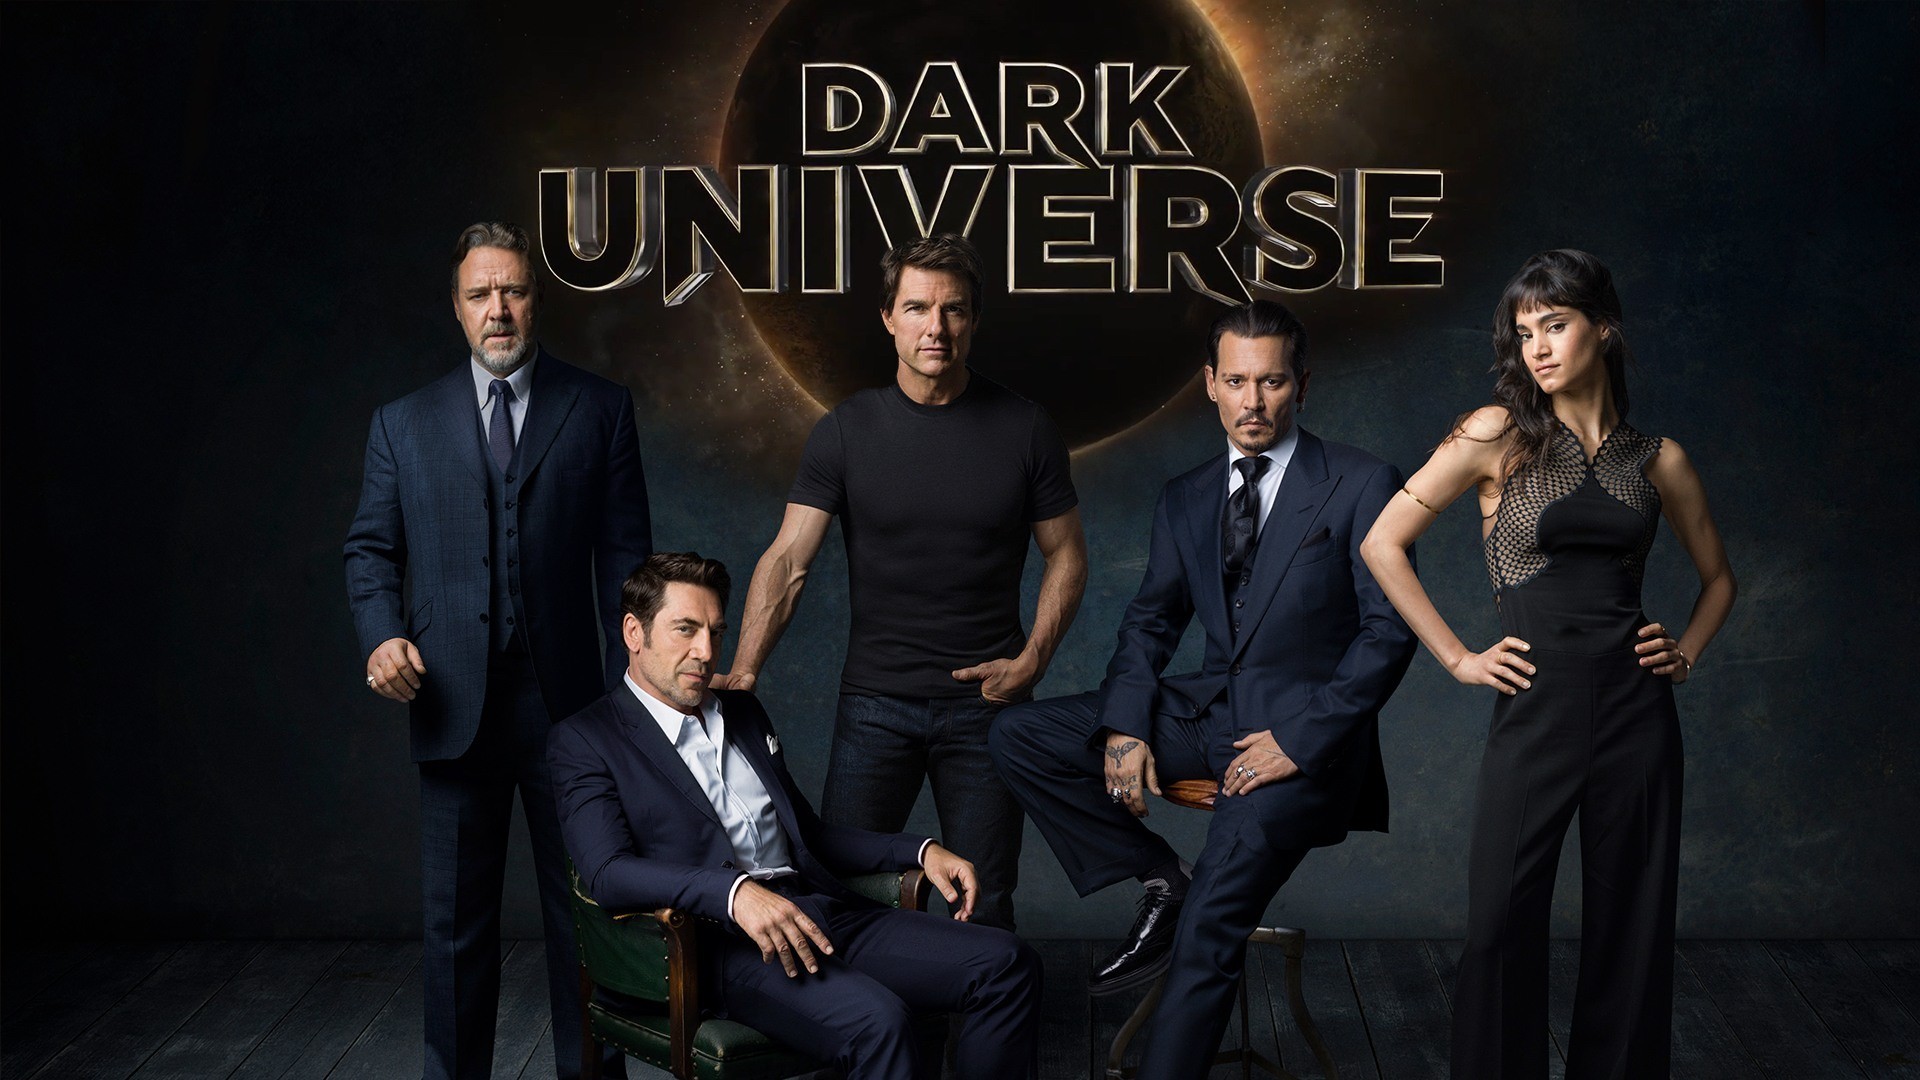 Dark Universe announced as Universal Monsters shared universe Depp, Bardem, Condon and Elfman confirmed – Movies